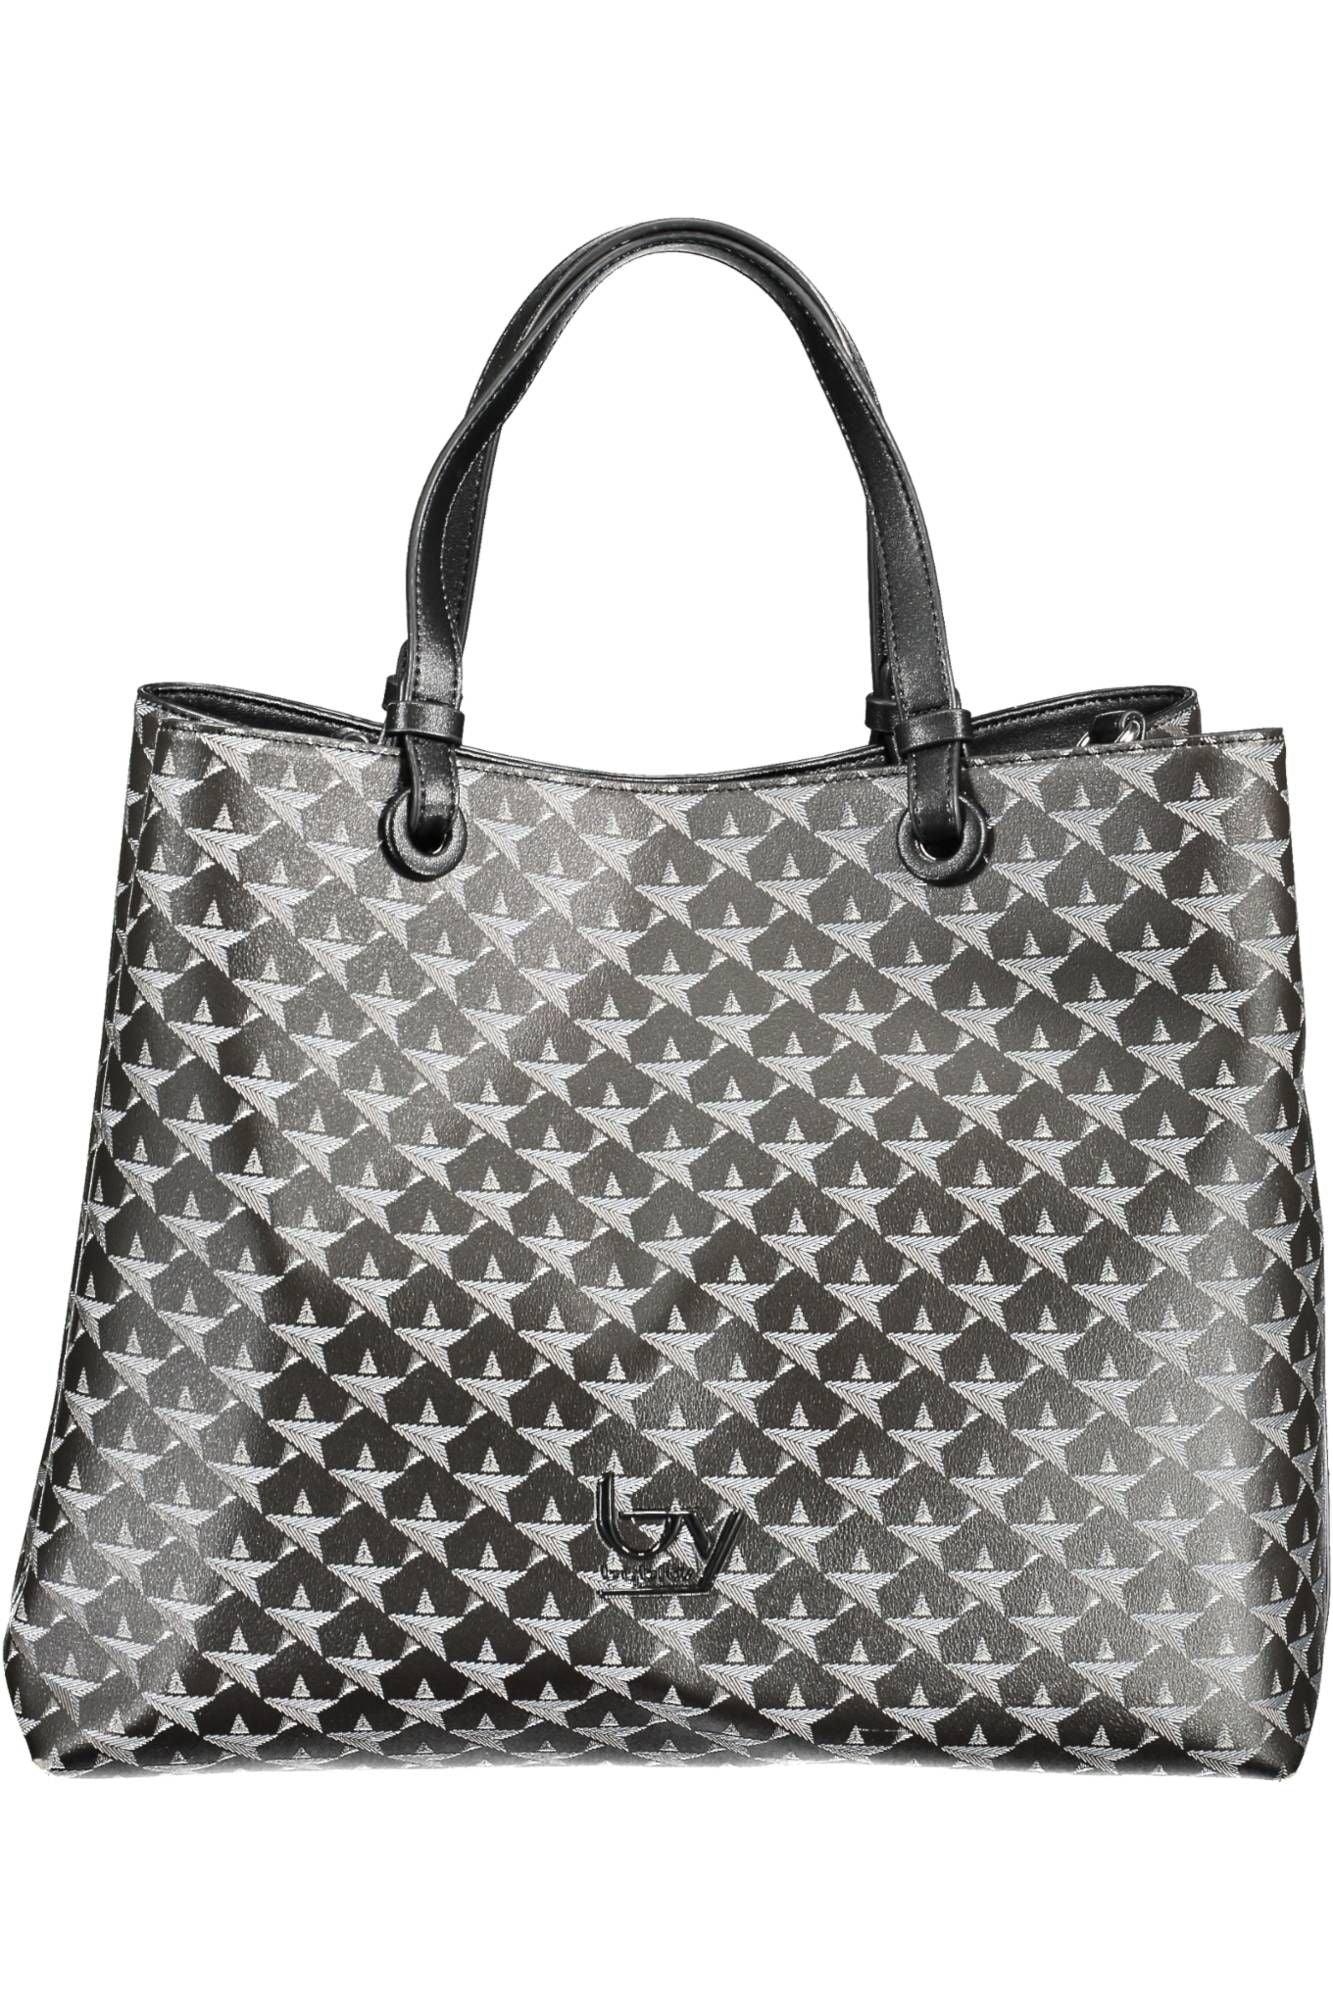 BYBLOS Chic Black Two-Handle Bag with Contrasting Details - PER.FASHION